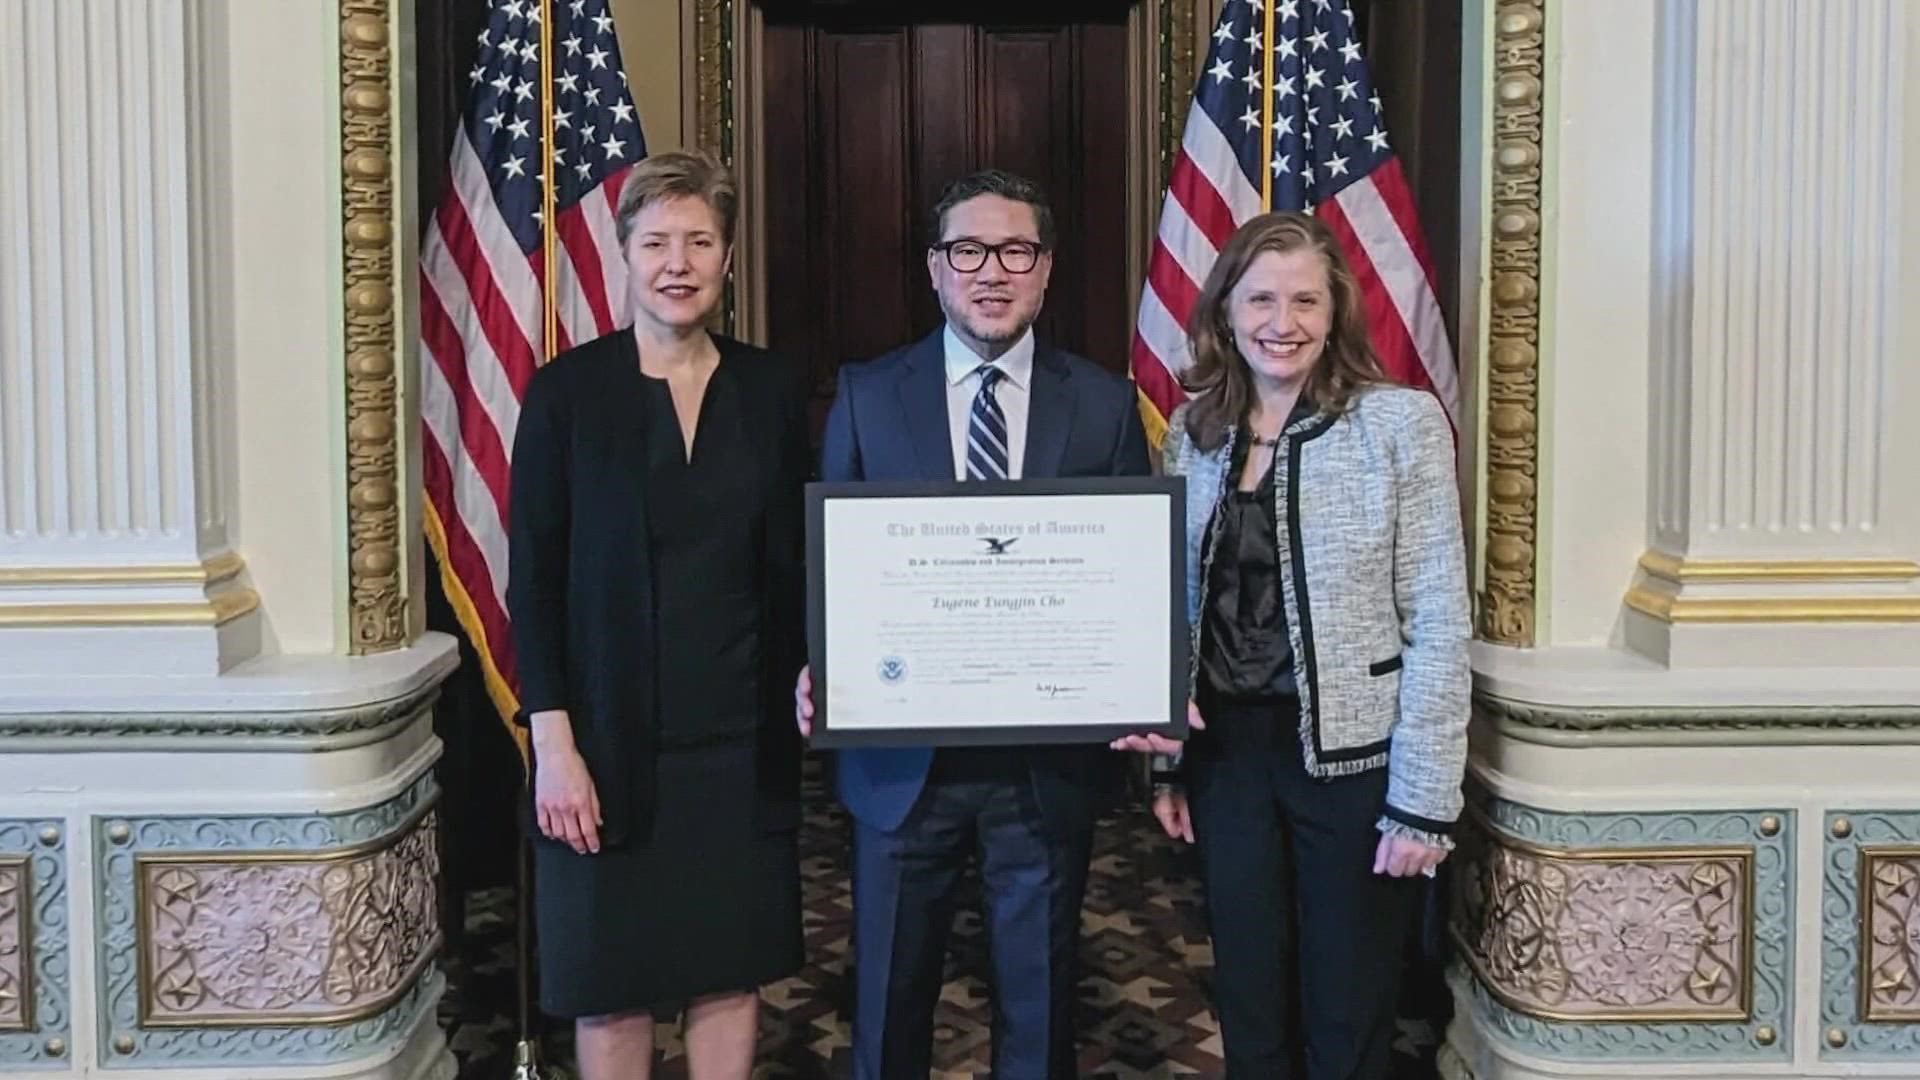 Eugene Cho was recognized as an "Outstanding American by Choice," an award given to recognize naturalized citizens who have made significant contributions to the US.